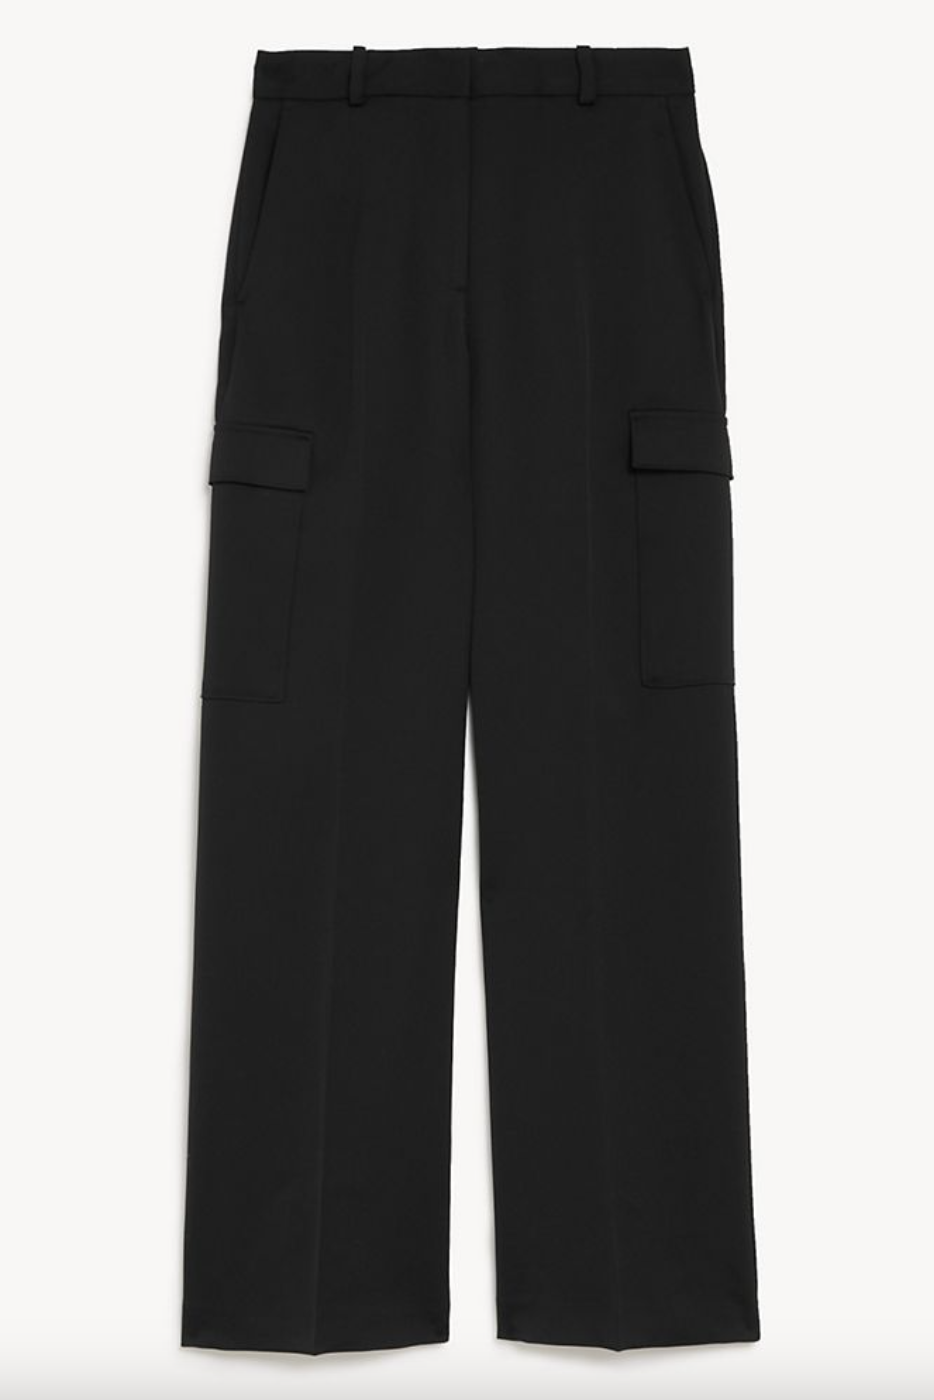 High Waisted Wide Leg Cargo Jeans, M&S Collection